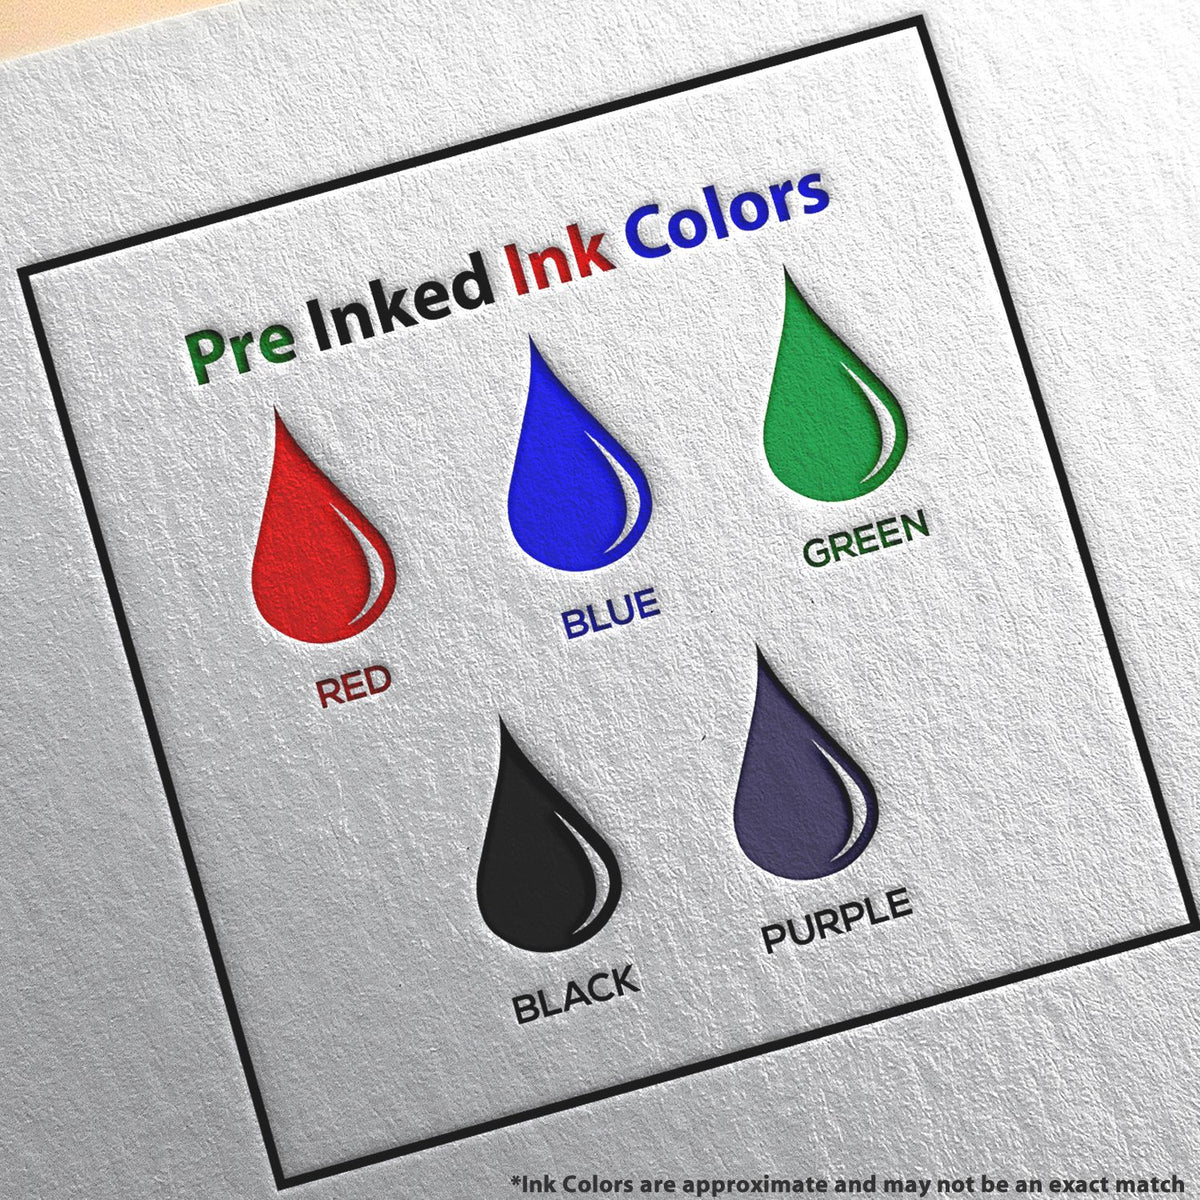 A picture showing the different ink colors or hues available for the Slim Pre-Inked Virginia Landscape Architect Seal Stamp product.